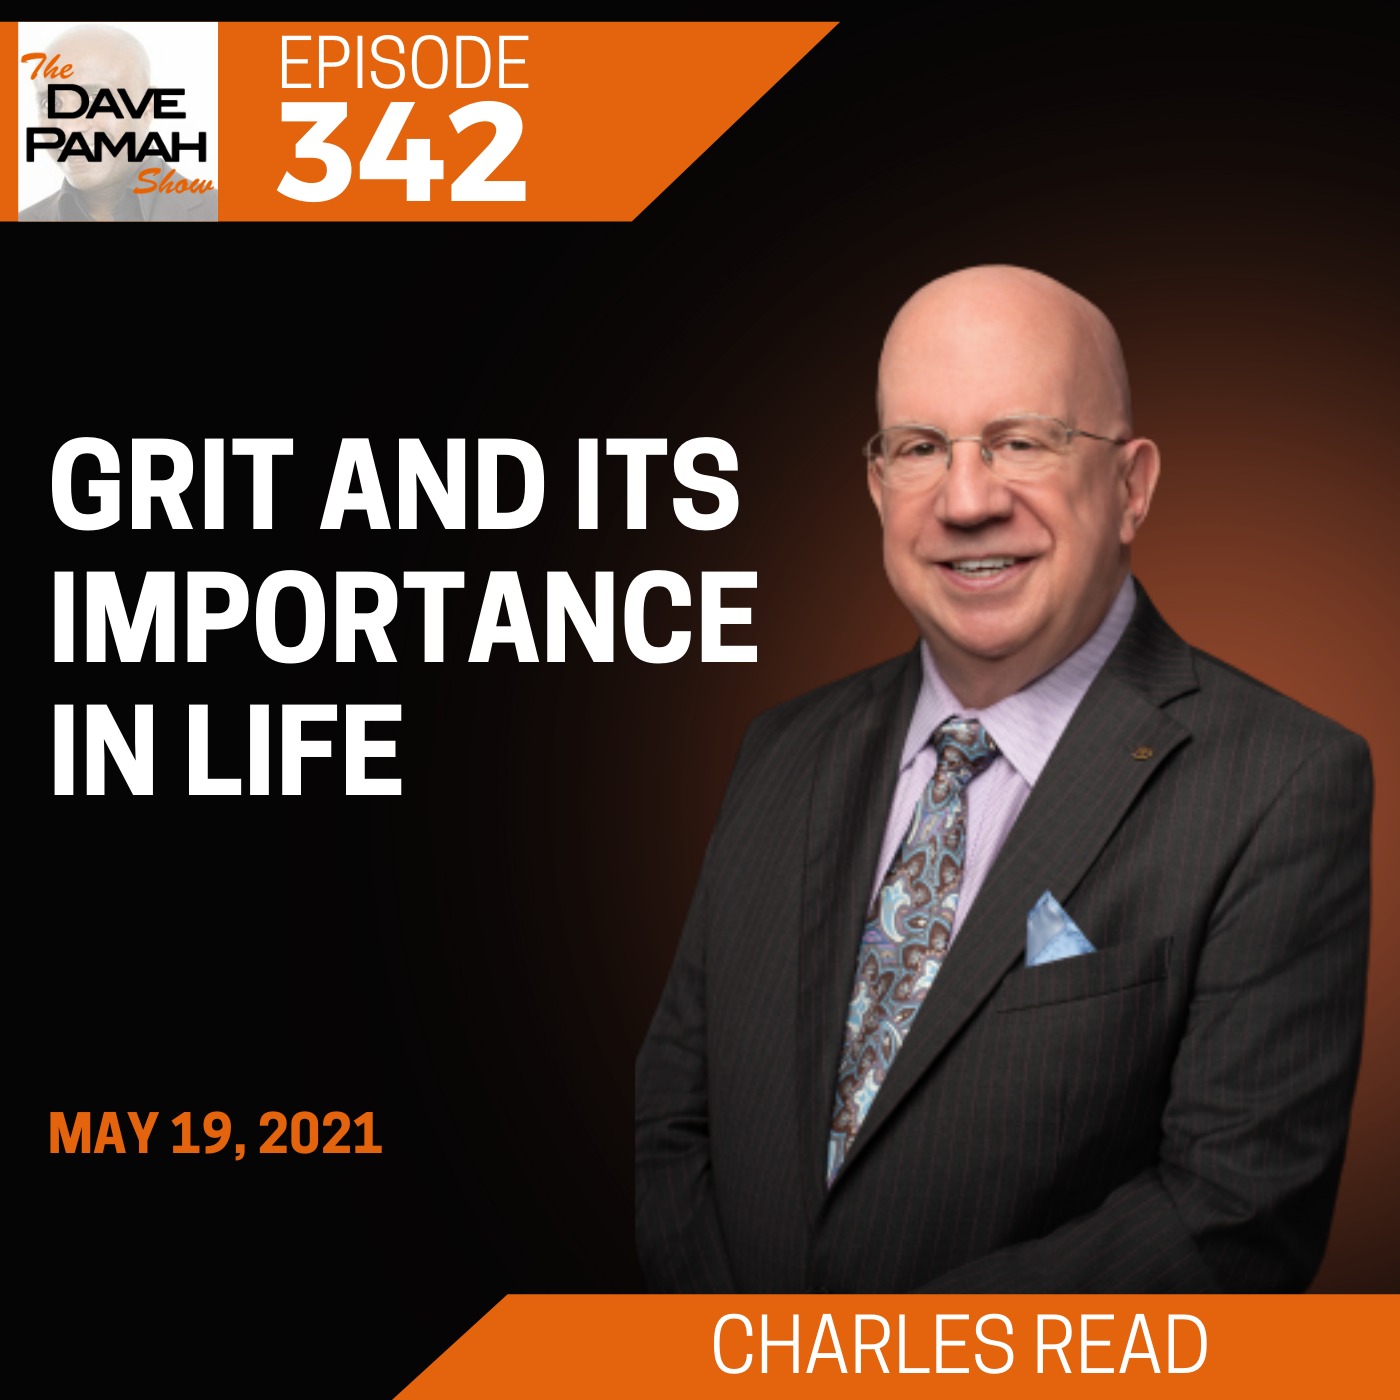 Grit and its importance in life with Charles Read Image